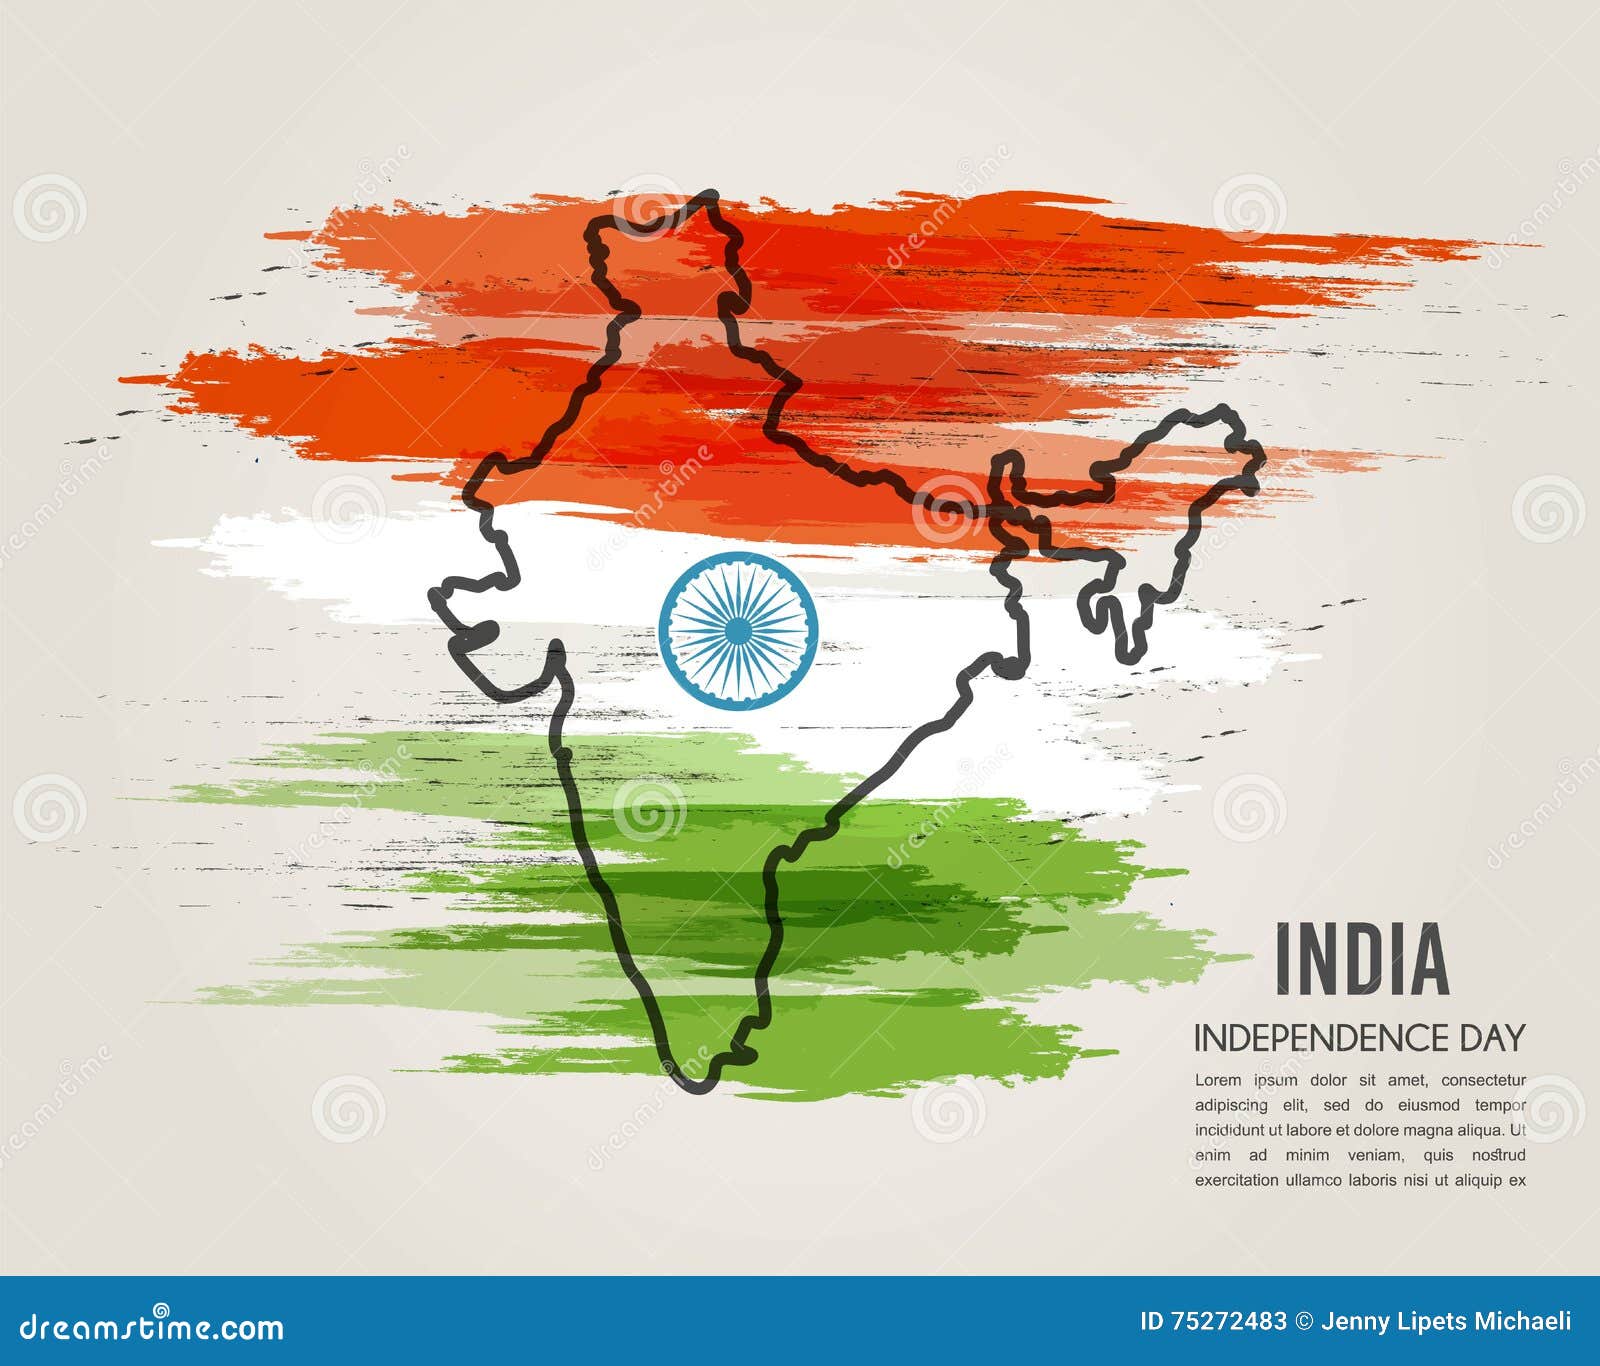 Flat India Independence Day Illustration - TemplateMonster